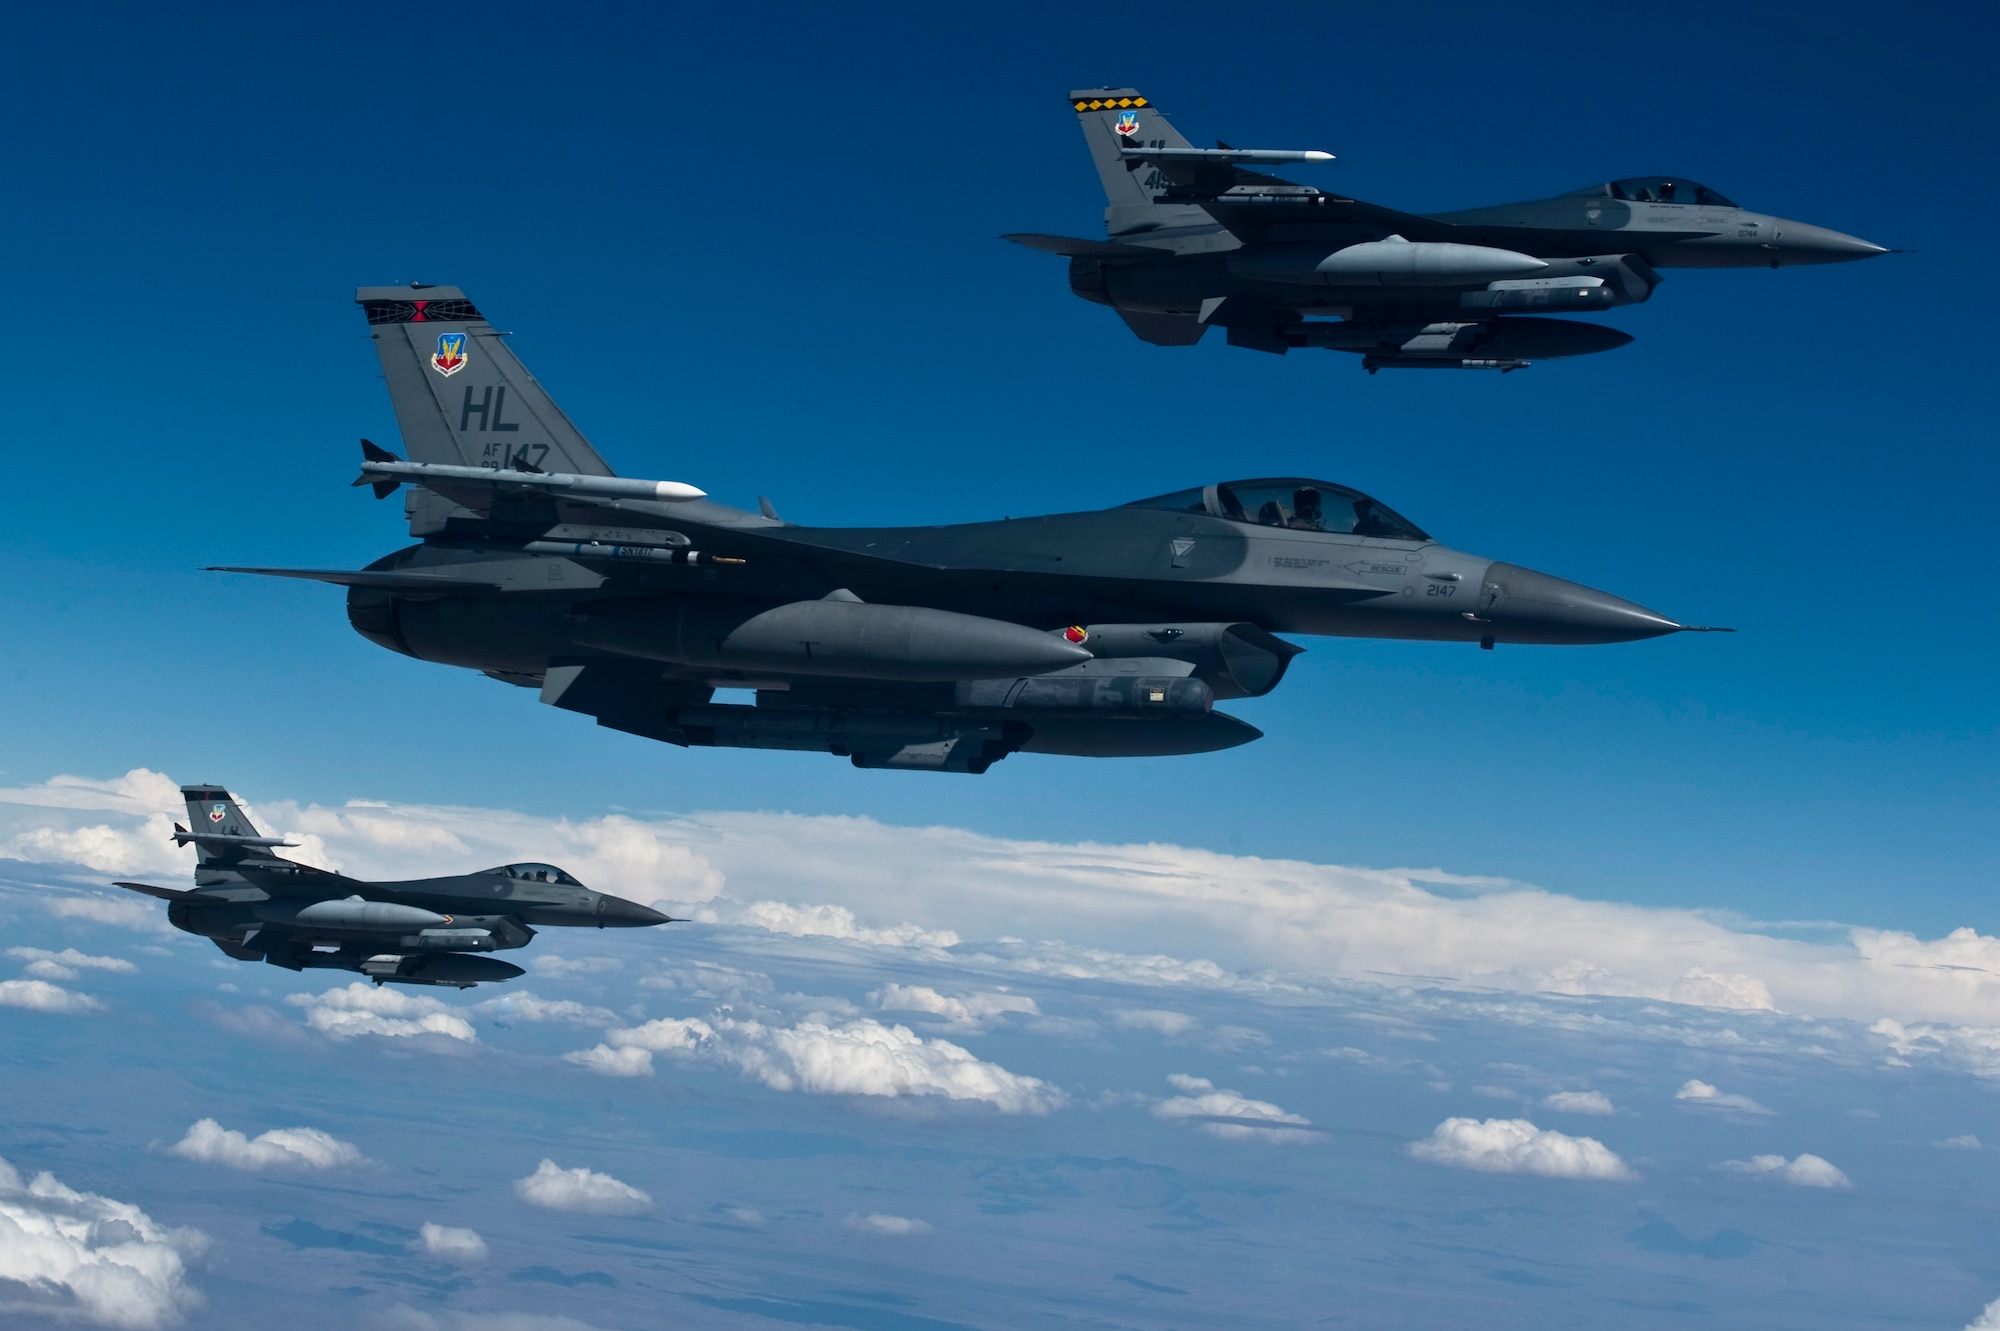 A three-ship of F-16 Fighting Falcons from the 421st Fighter Squadron, Hill Air Force Base, Utah, participate in Red Flag 12-4 July 20, 2012, over the Nevada Test and Training Range. The 421st FS prepares to deploy worldwide to conduct day/night air superiority and precision strike sorties employing laser-guided and inertially aided munitions during contingencies and combat. (U.S. Air Force photo by Airman 1st Class Daniel Hughes/Released).